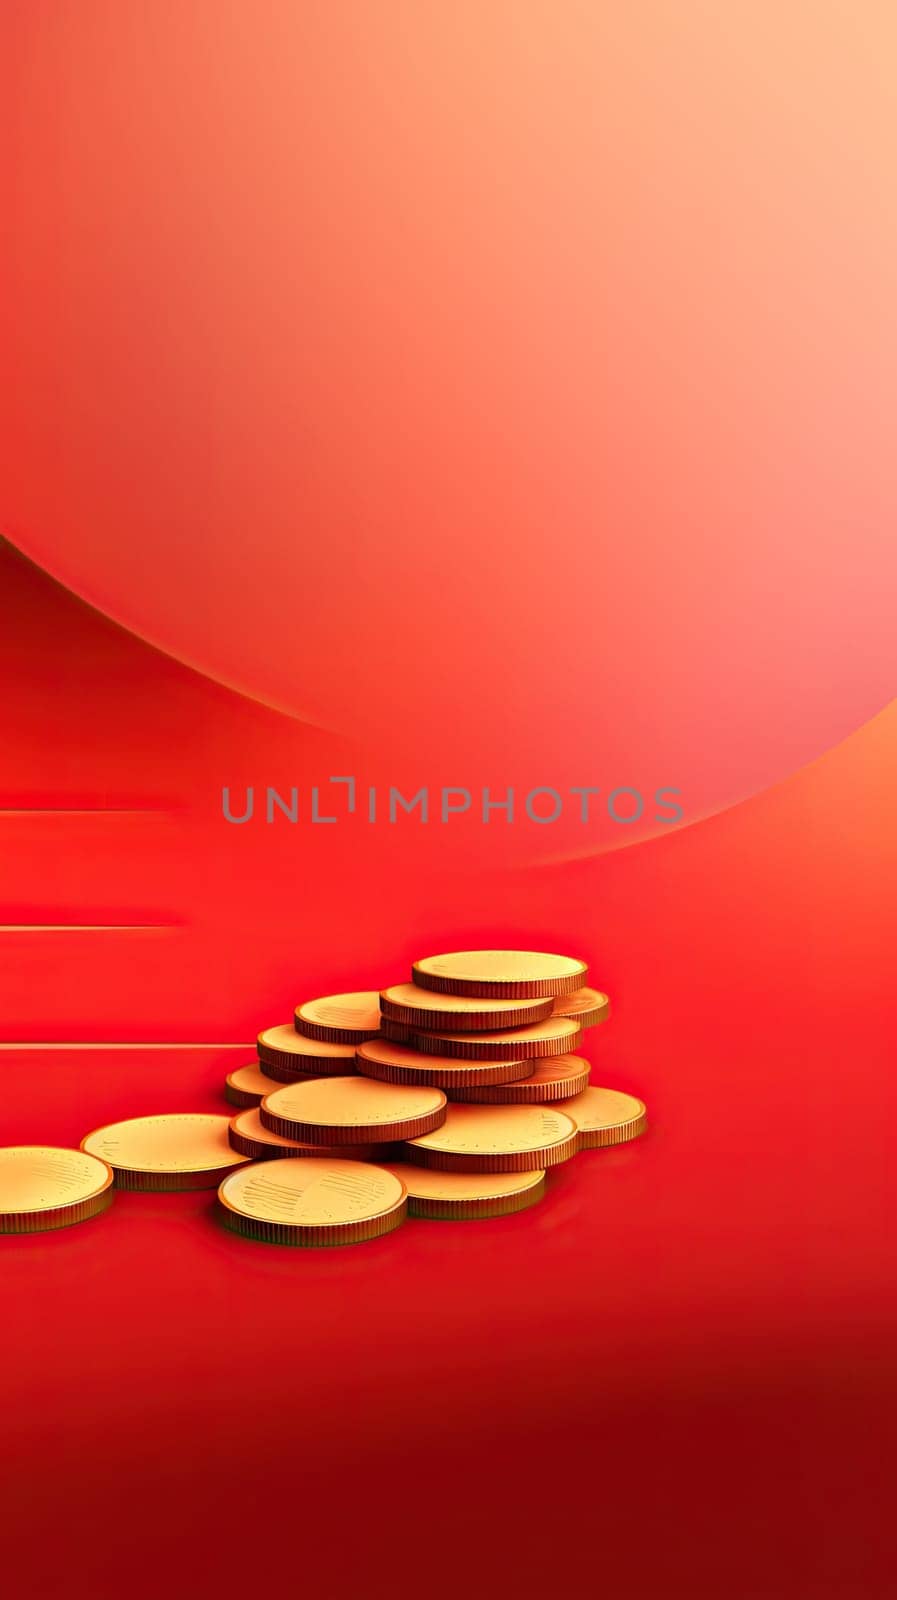 Abstract chinese background with golden coins isolated on red with copy space.